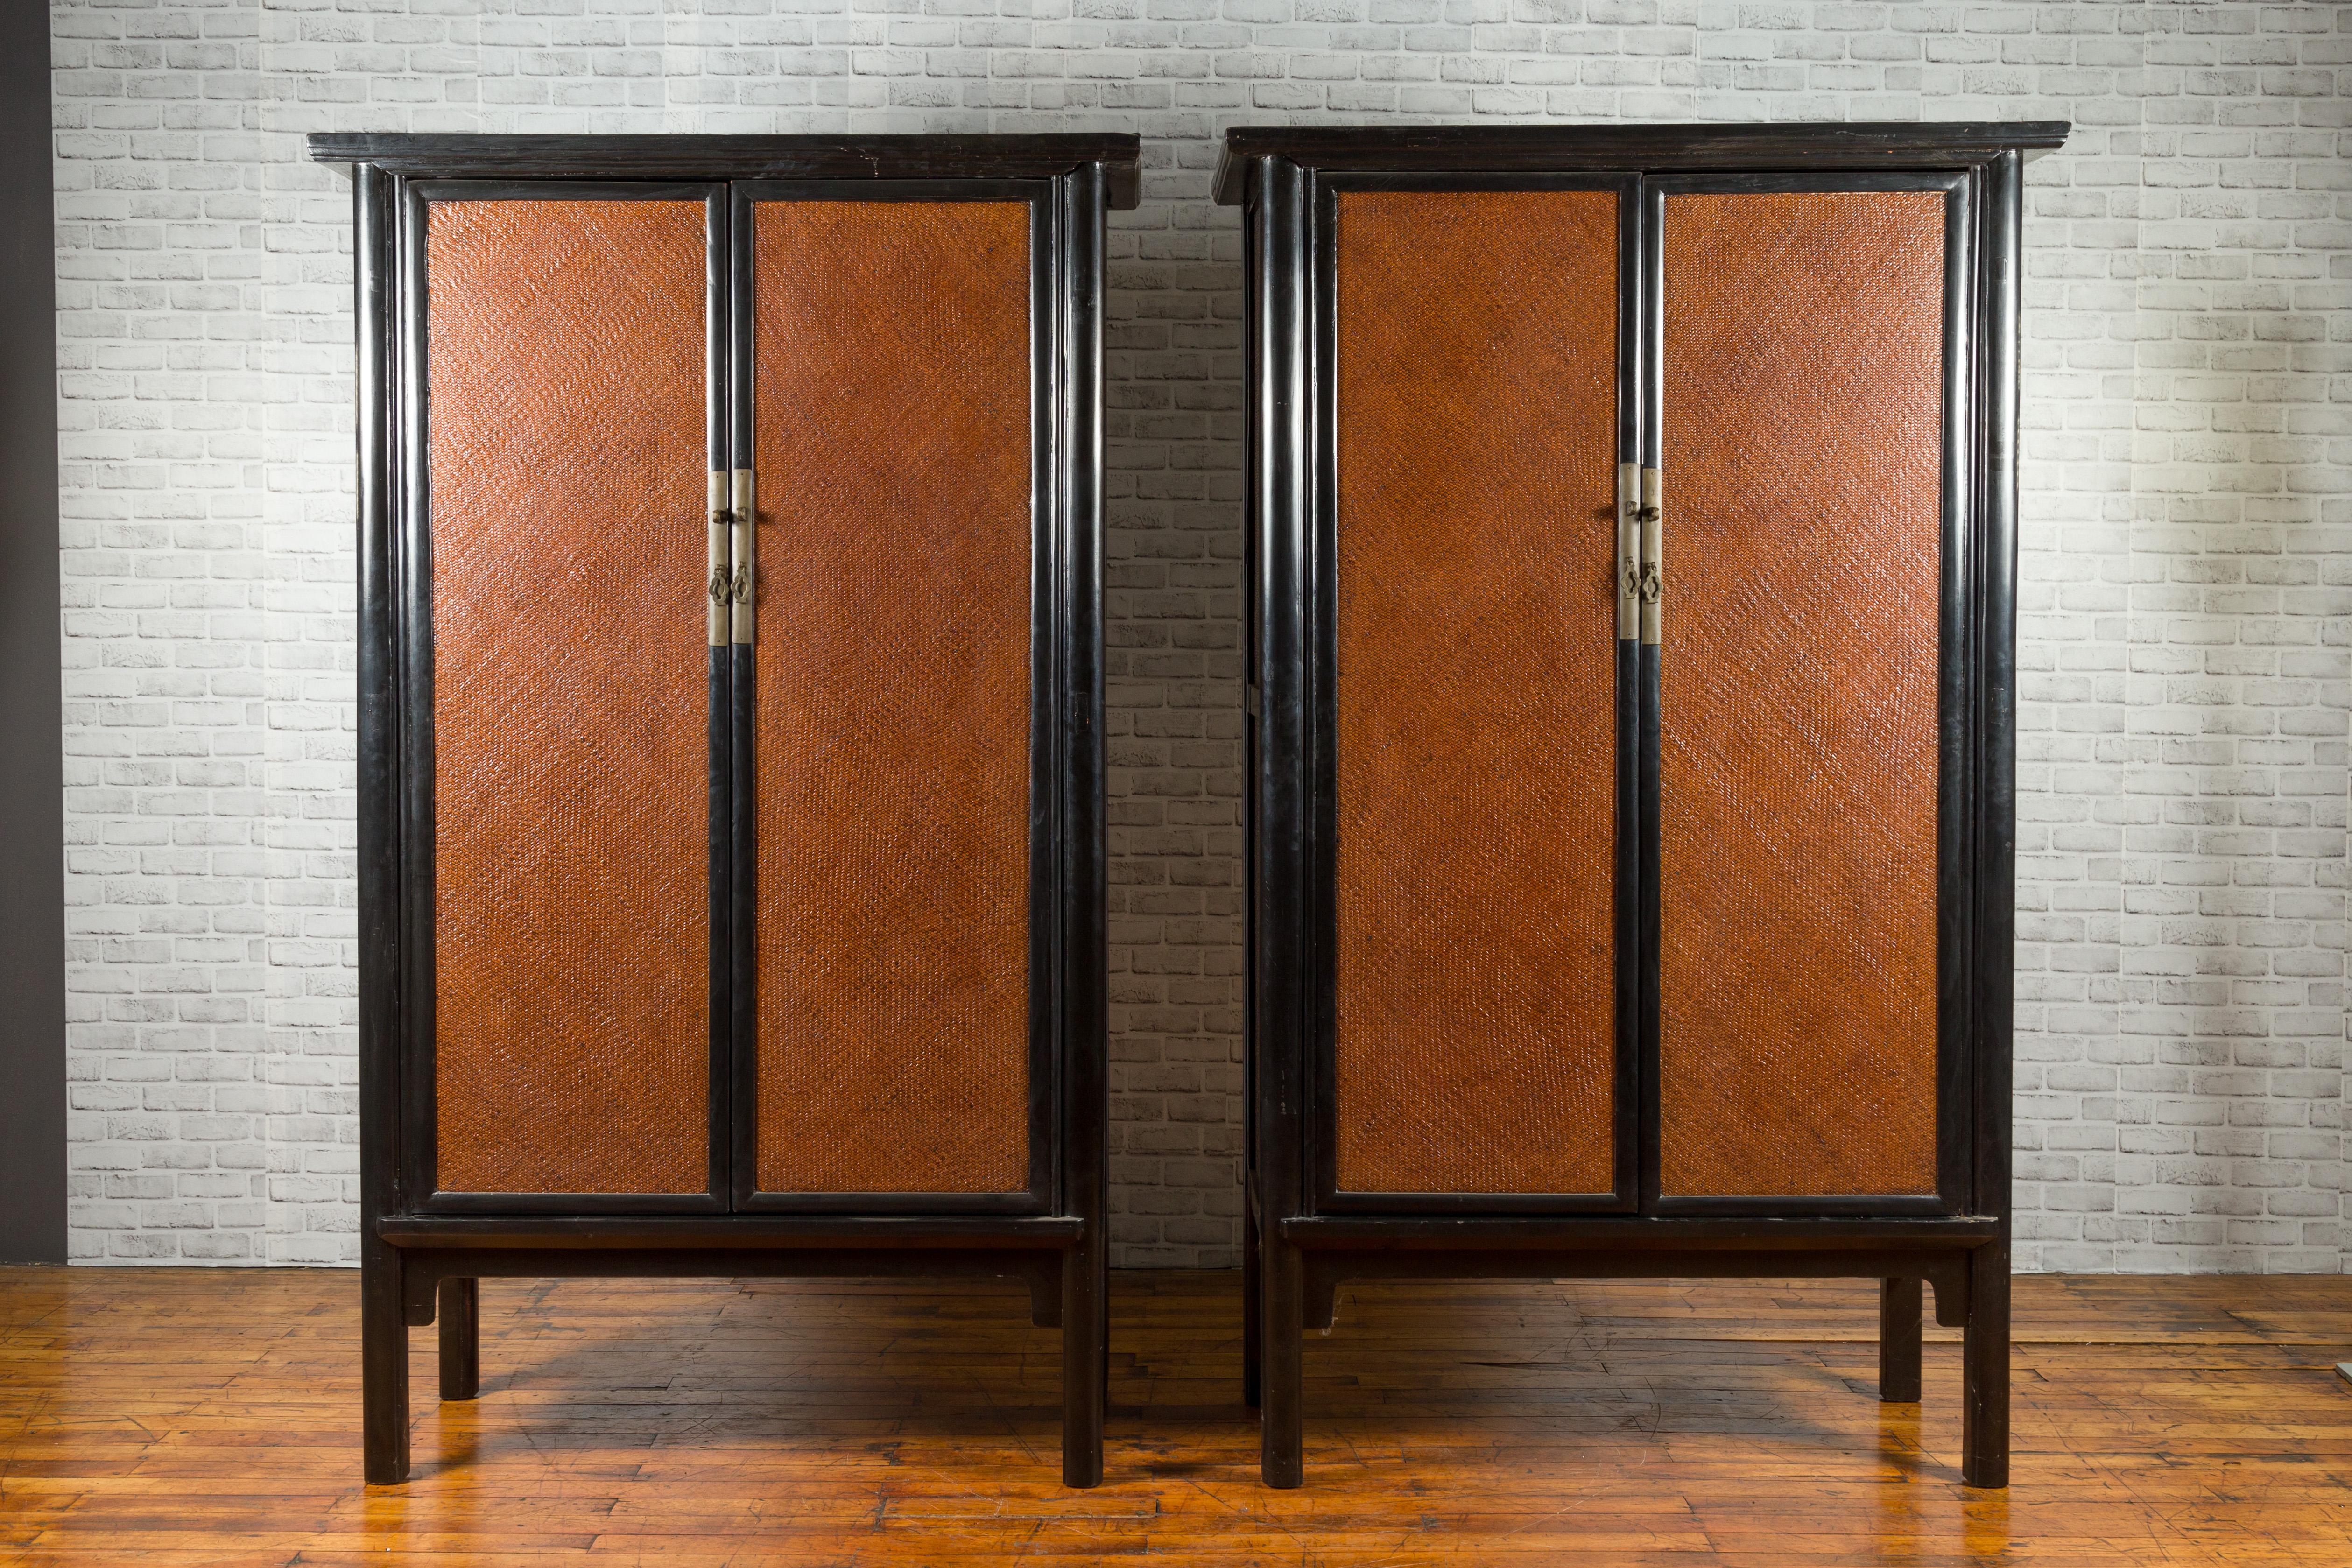 A Chinese Qing Dynasty period black lacquered cabinet from the 19th century, with woven rattan doors. We have two available that will make for a great pair. They are priced $5,800 each. Created in China during the Qing Dynasty, each cabinet features